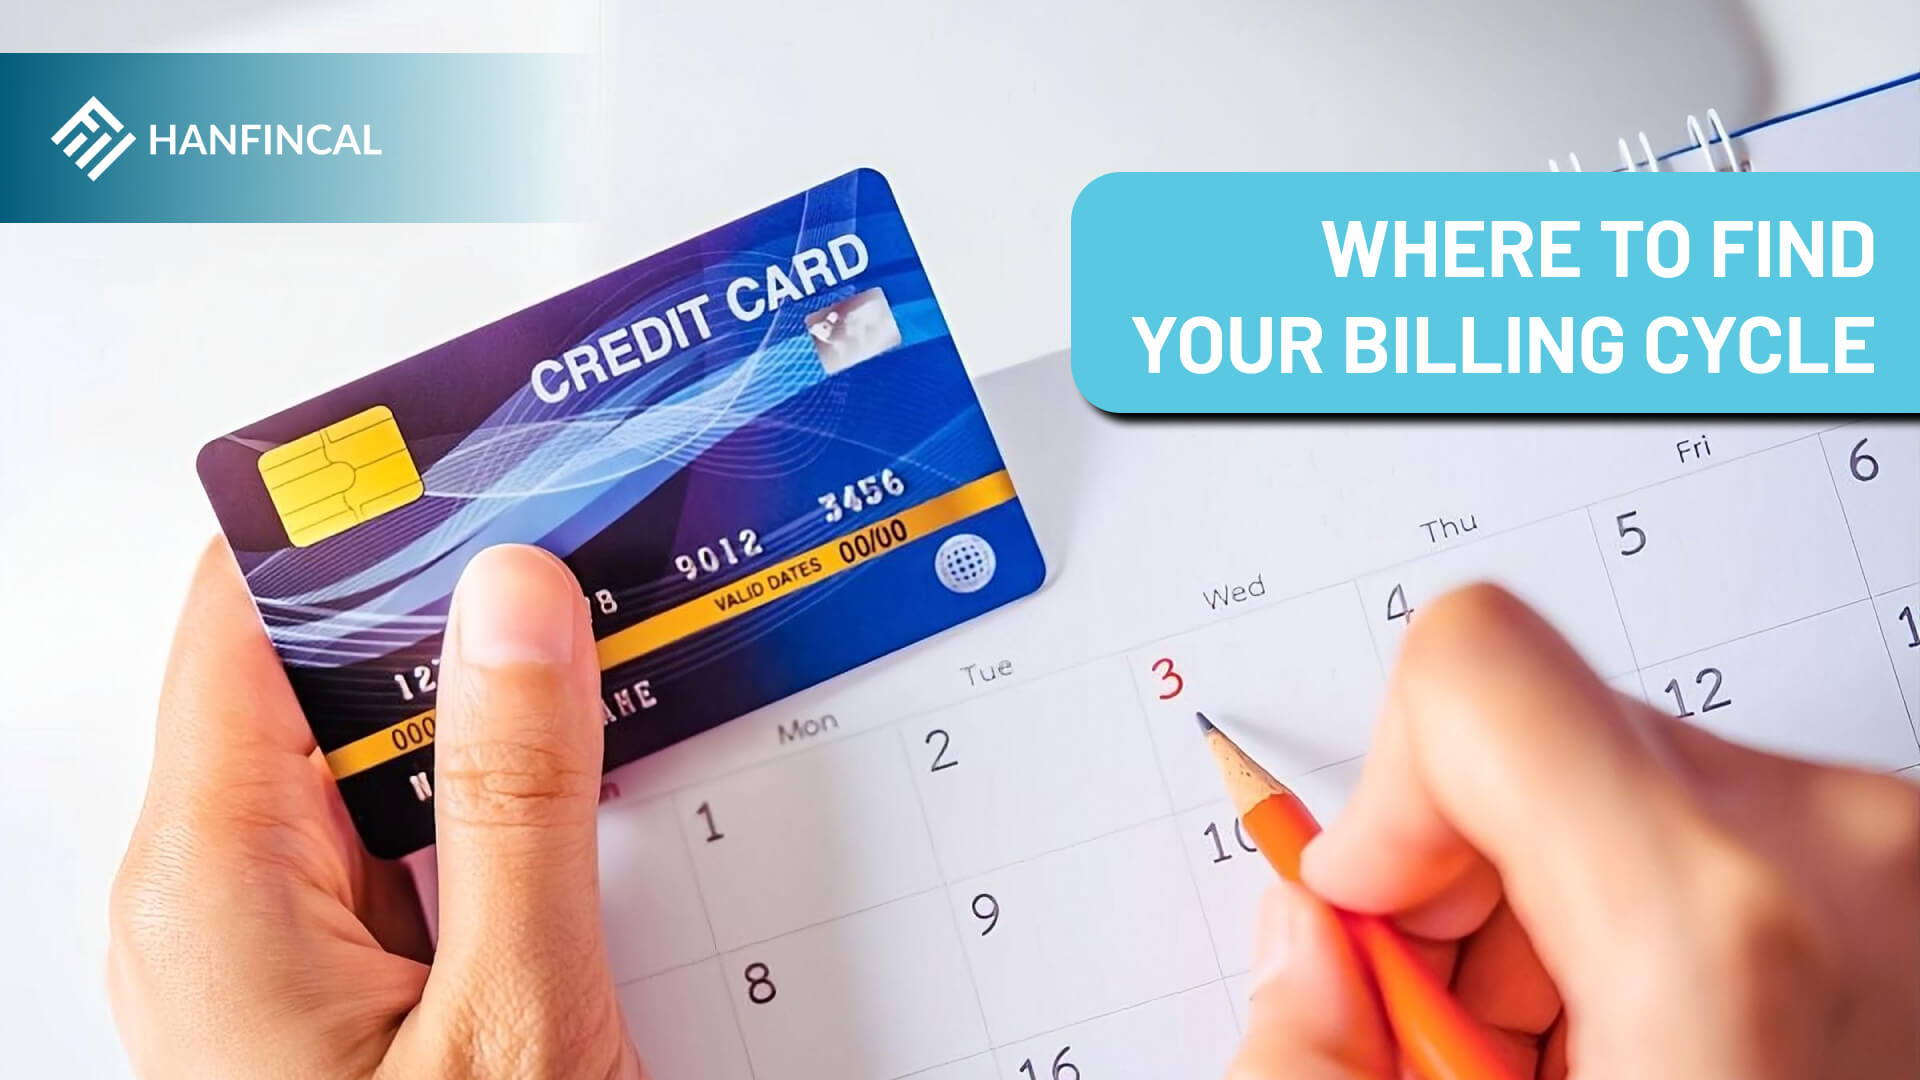 Where to find your billing cycle?